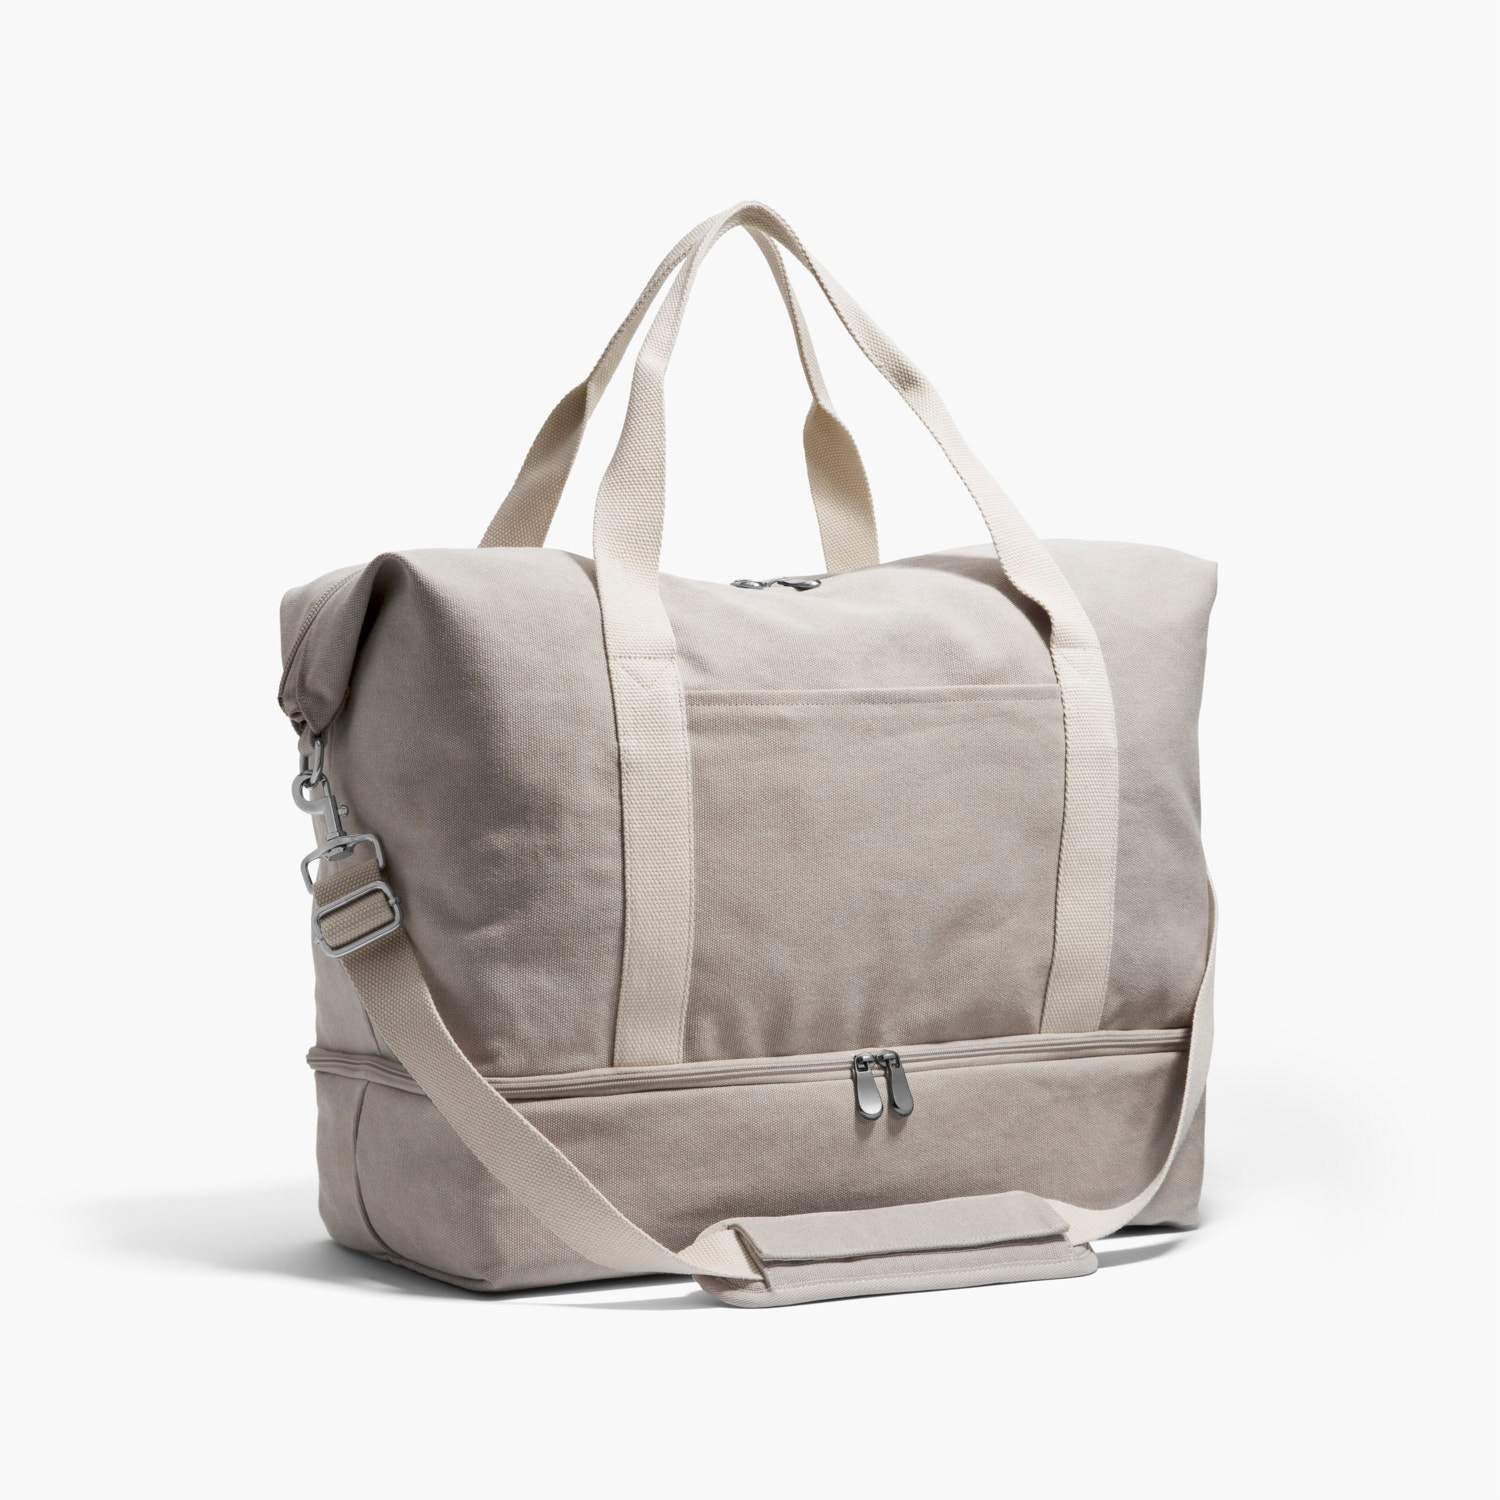 The Catalina Deluxe Large: Women's Weekender Bag in Dove Grey | Lo & Sons | Lo & Sons